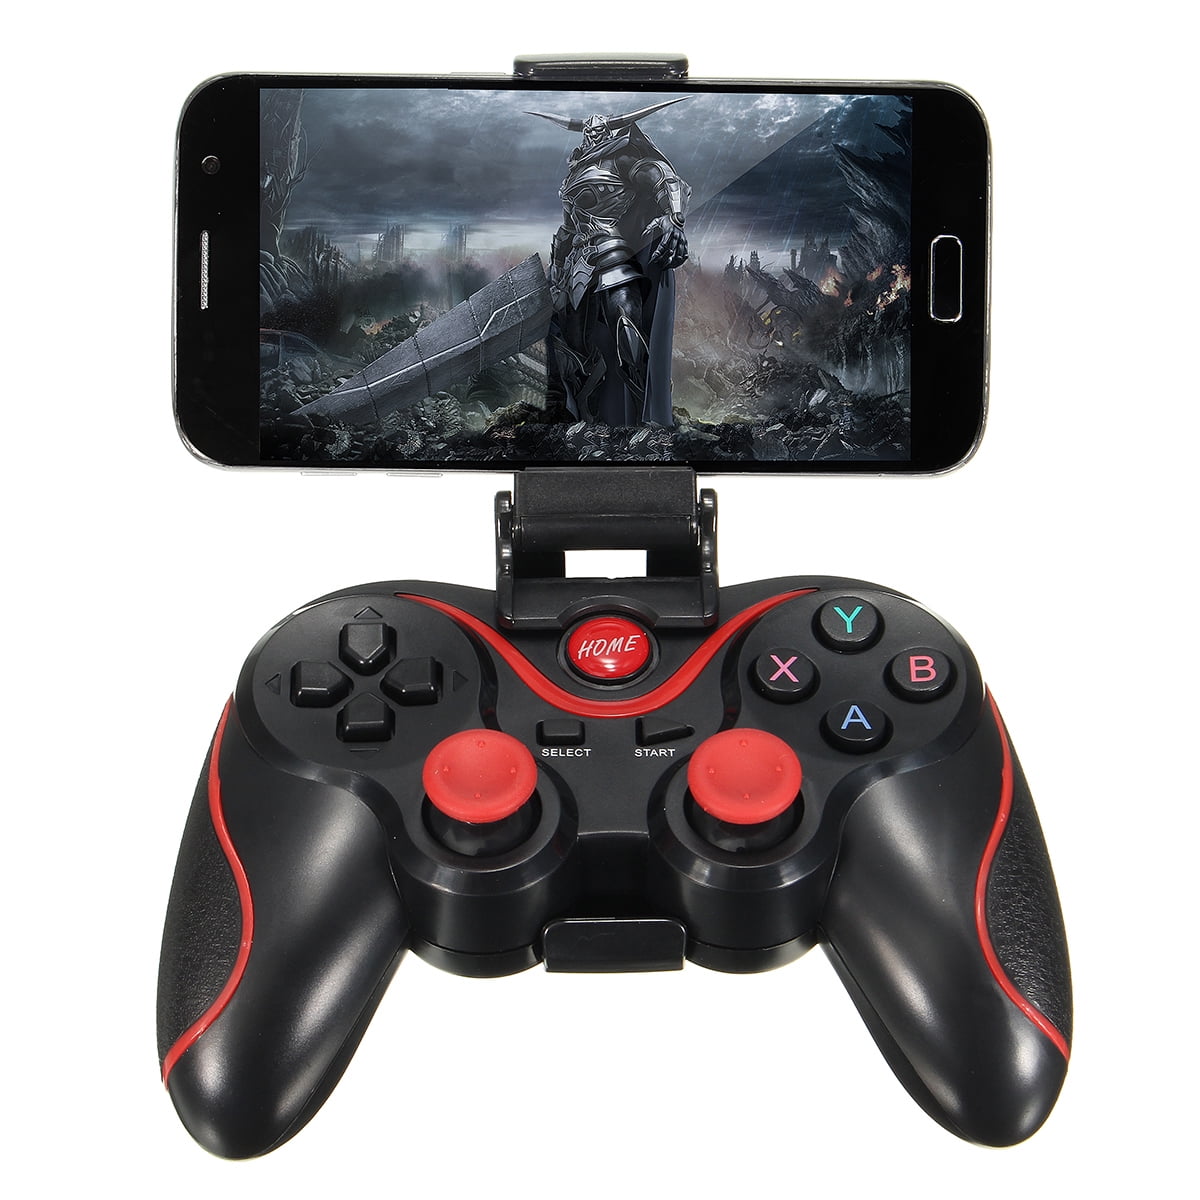 NoyoKere Wireless Bluetooth Gamepad Remote Joystick Controller Compatible with Android/IOS/PC black